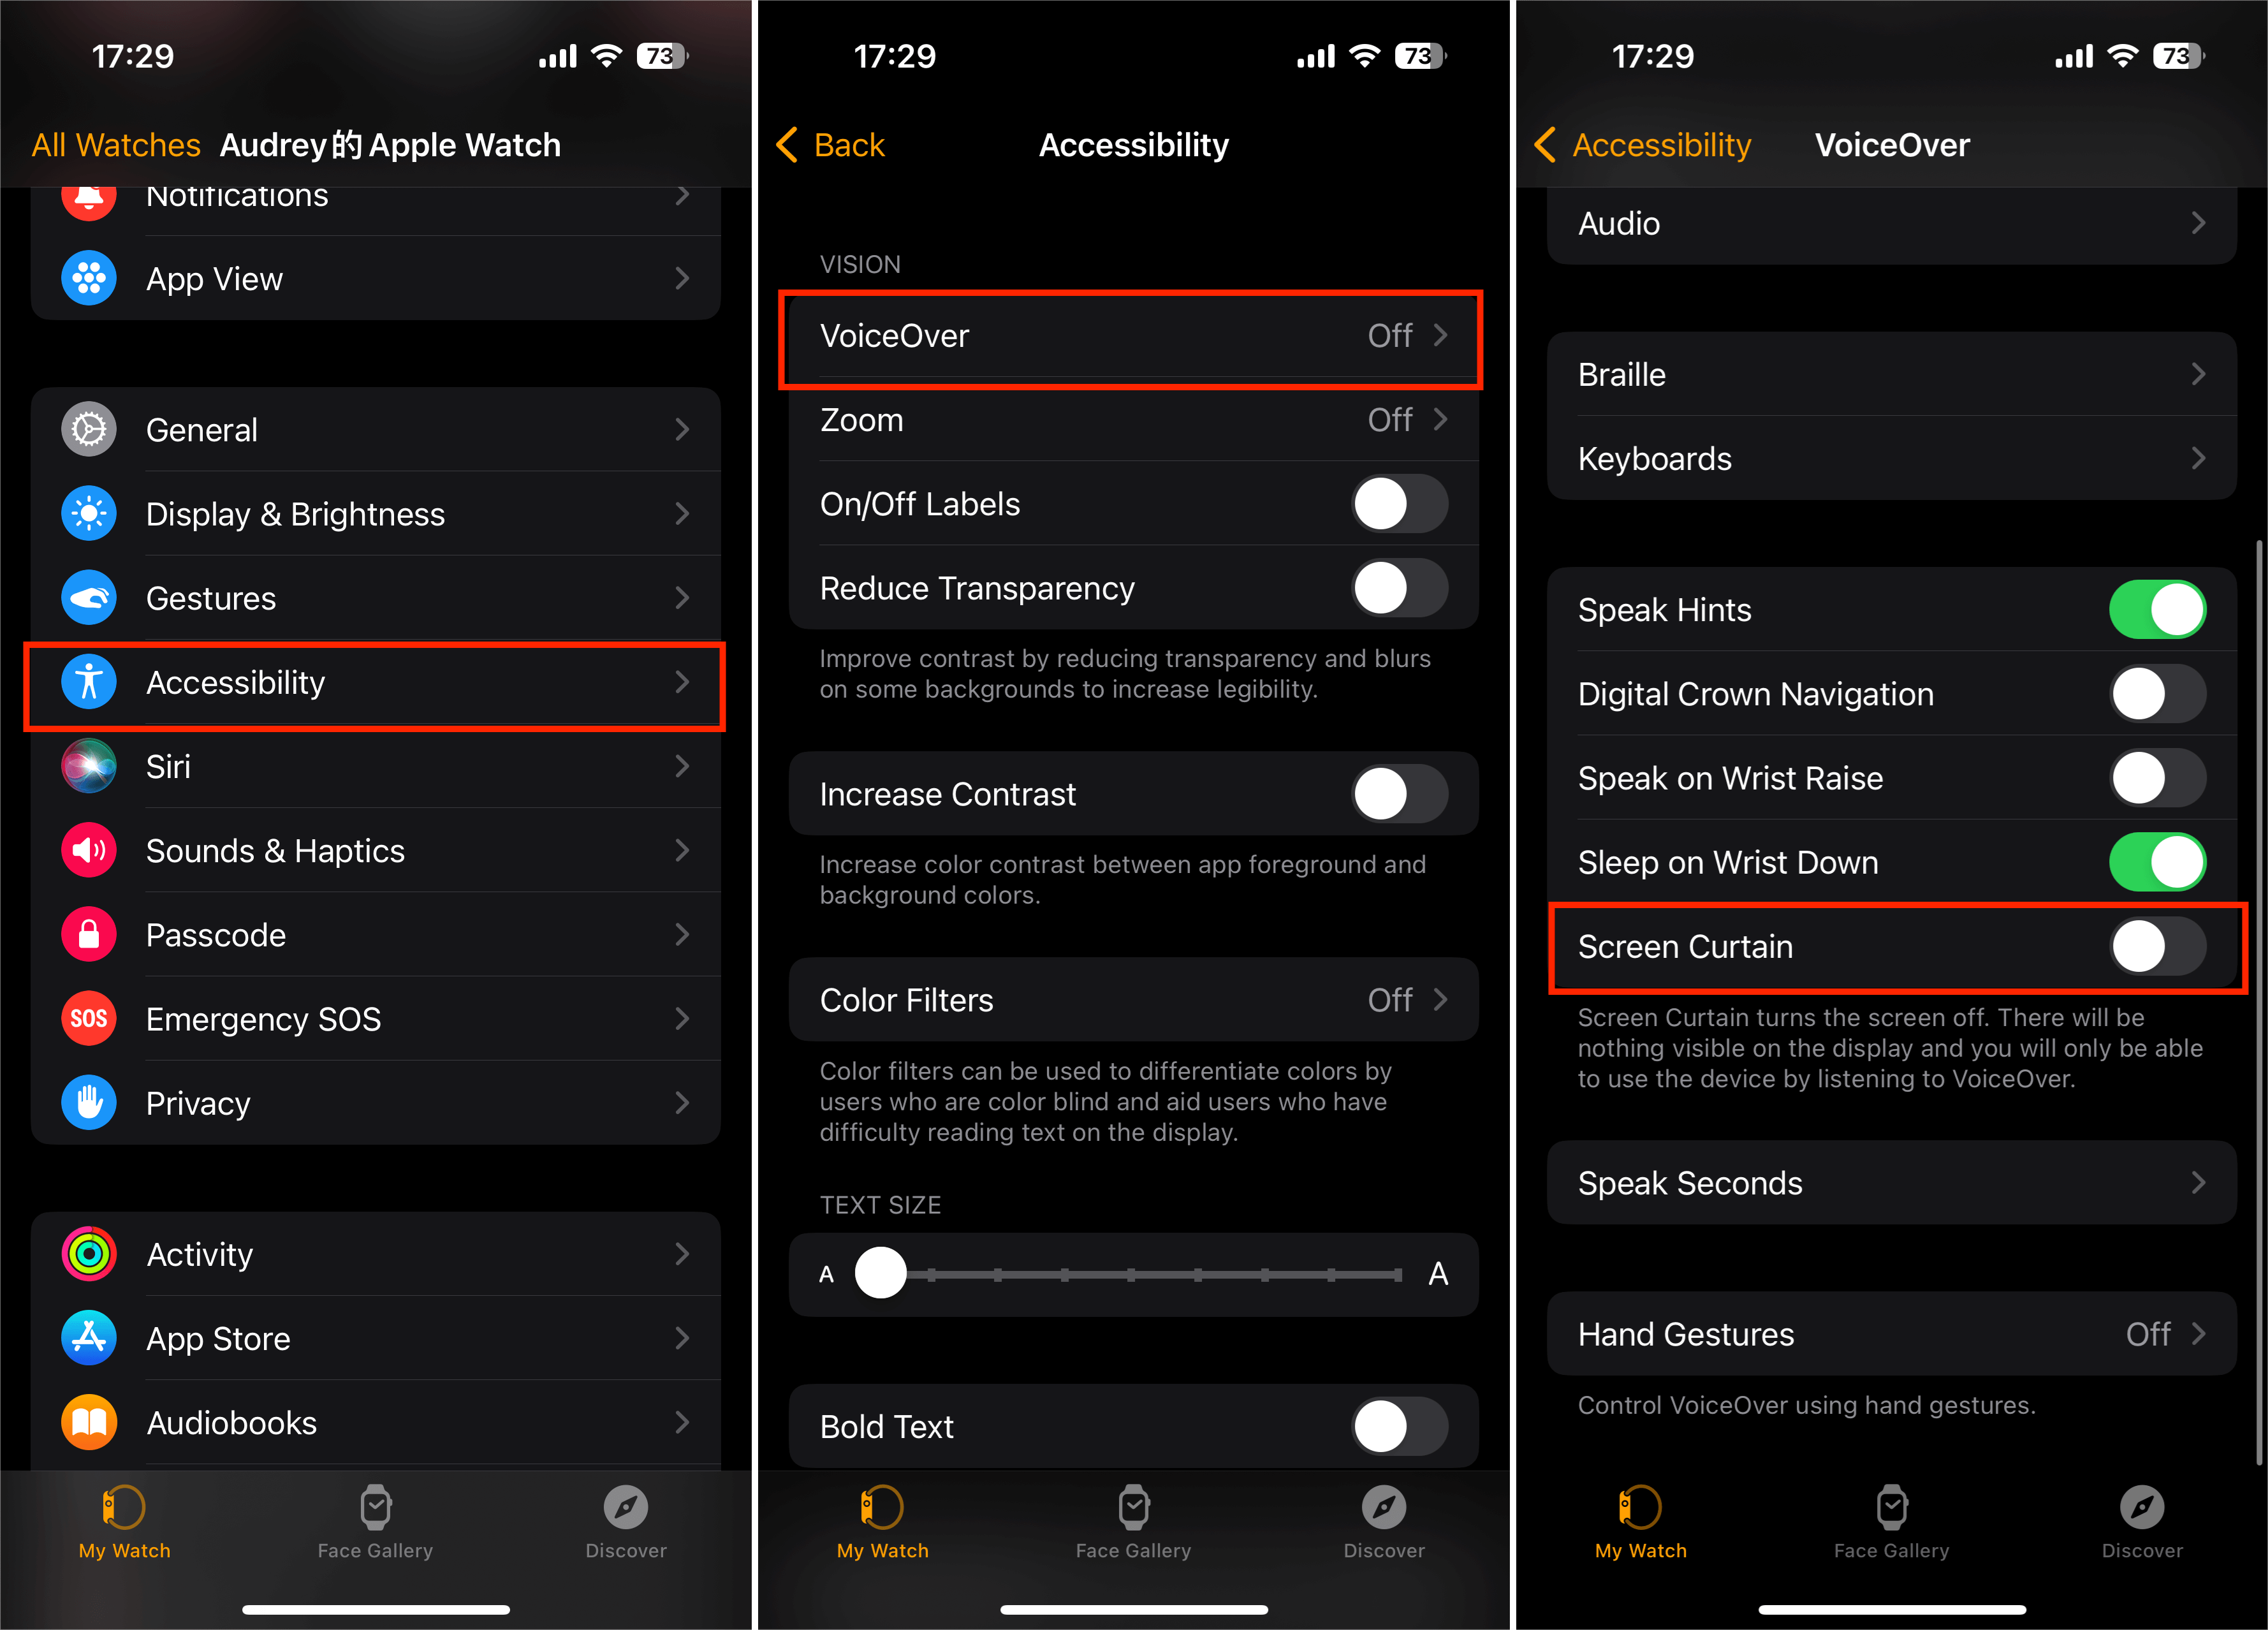 Disable VoiceOver and Screen Curtain in the Watch App on iPhone